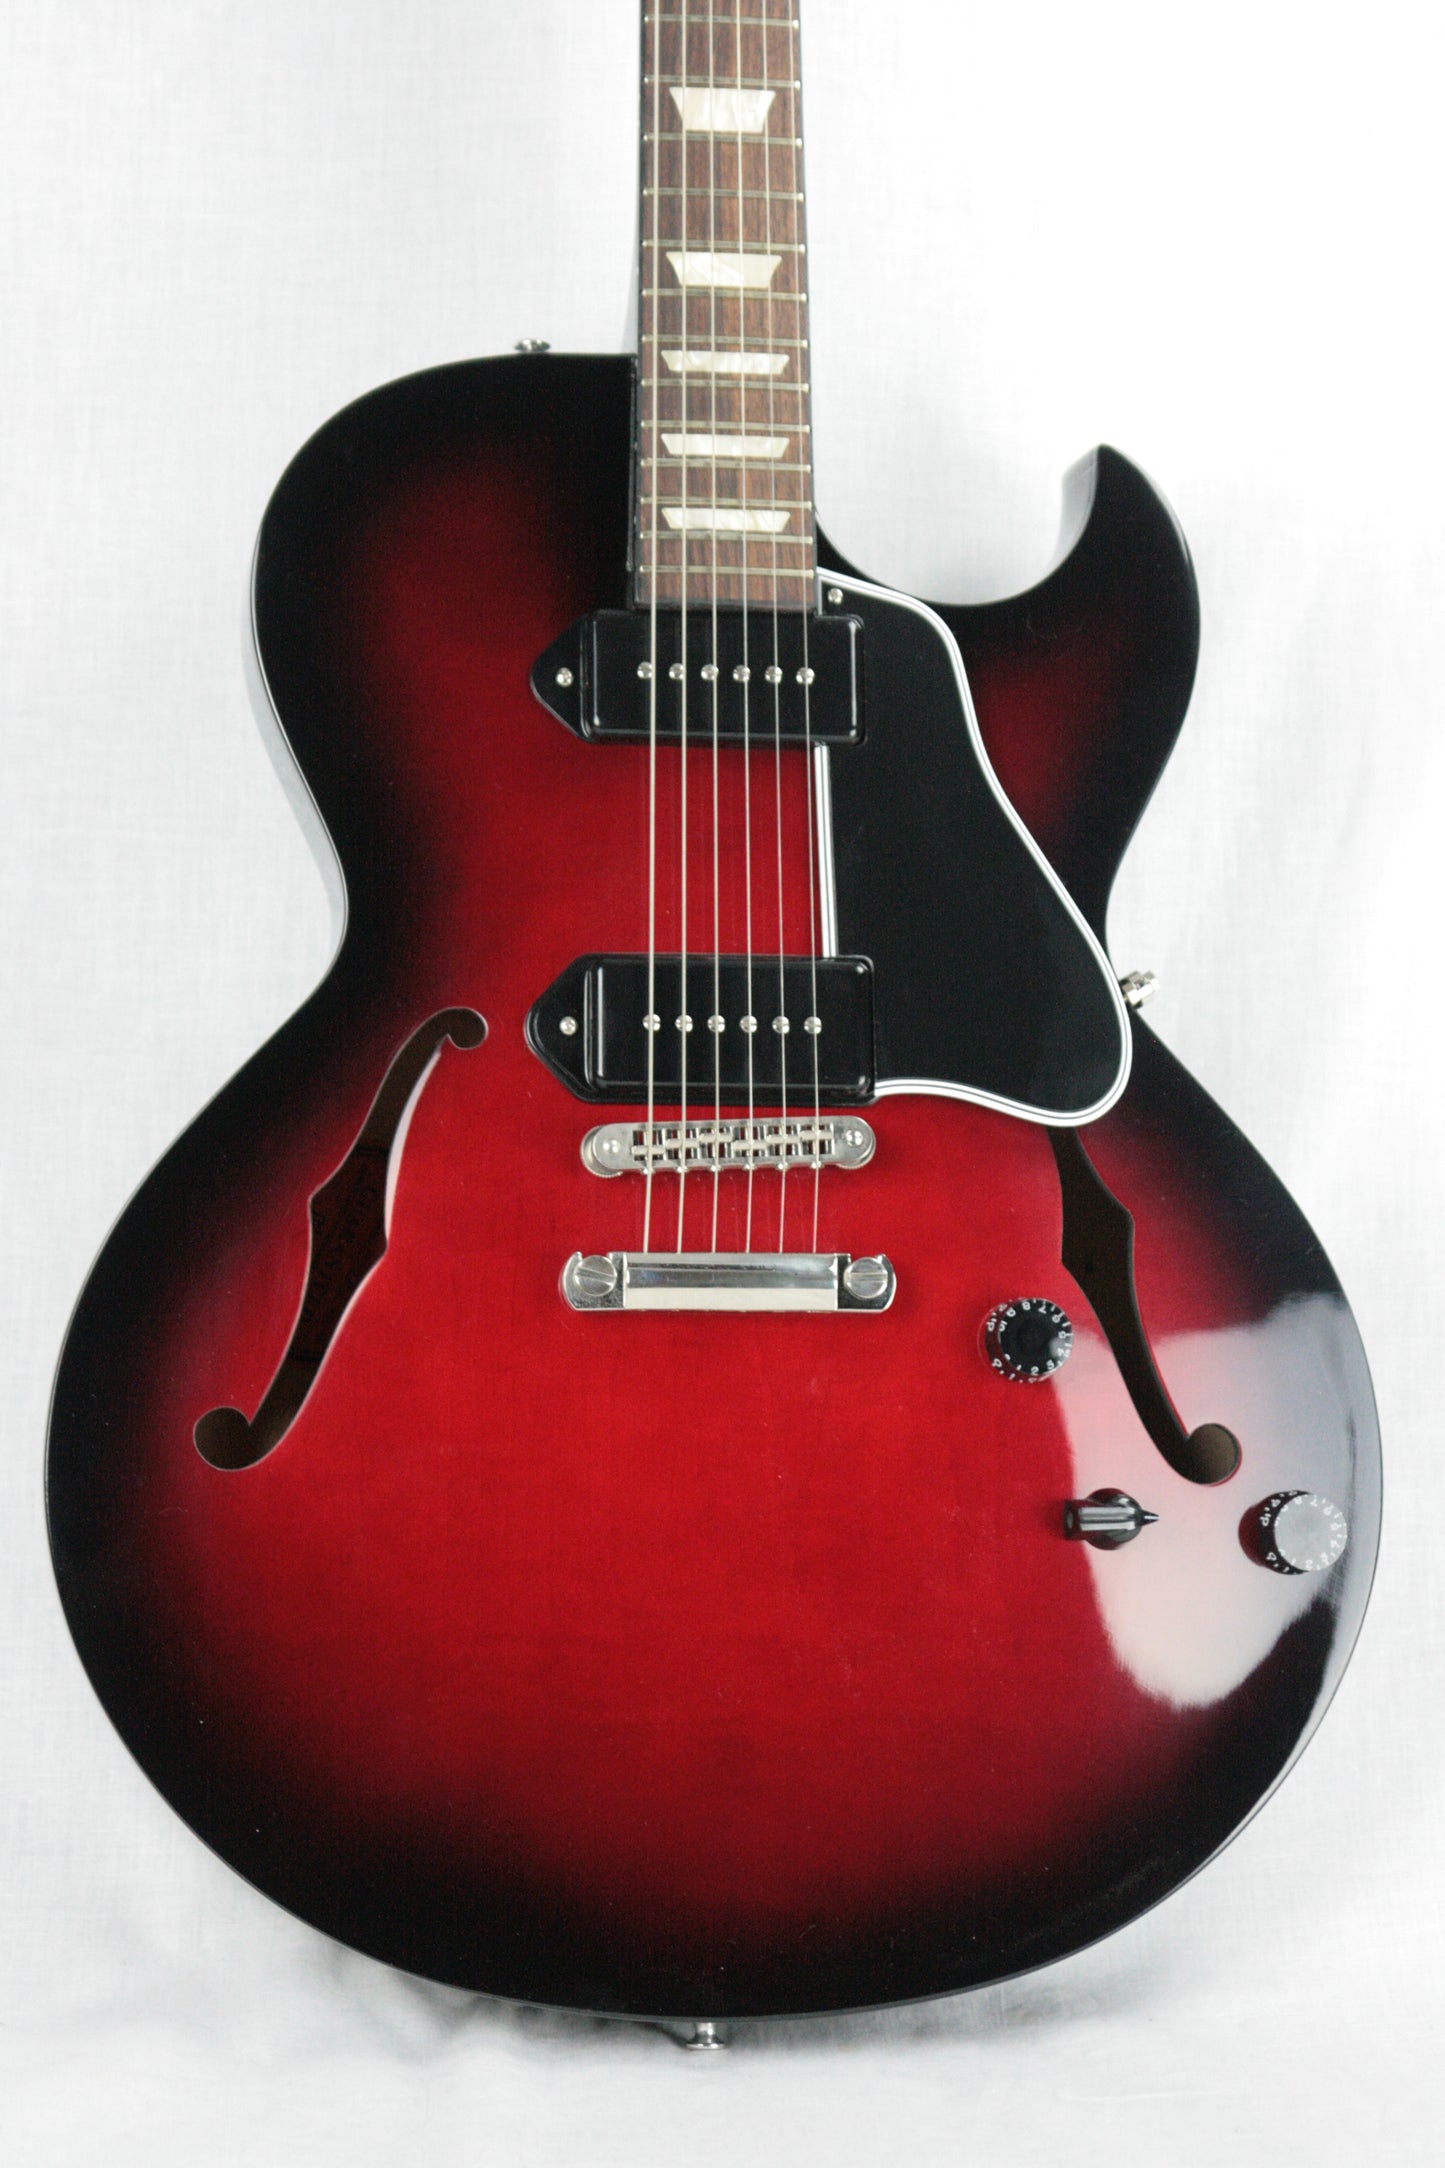 NOS 2014 Gibson ES-137 Billie Joe Armstrong Black Cherry! Limited Edition